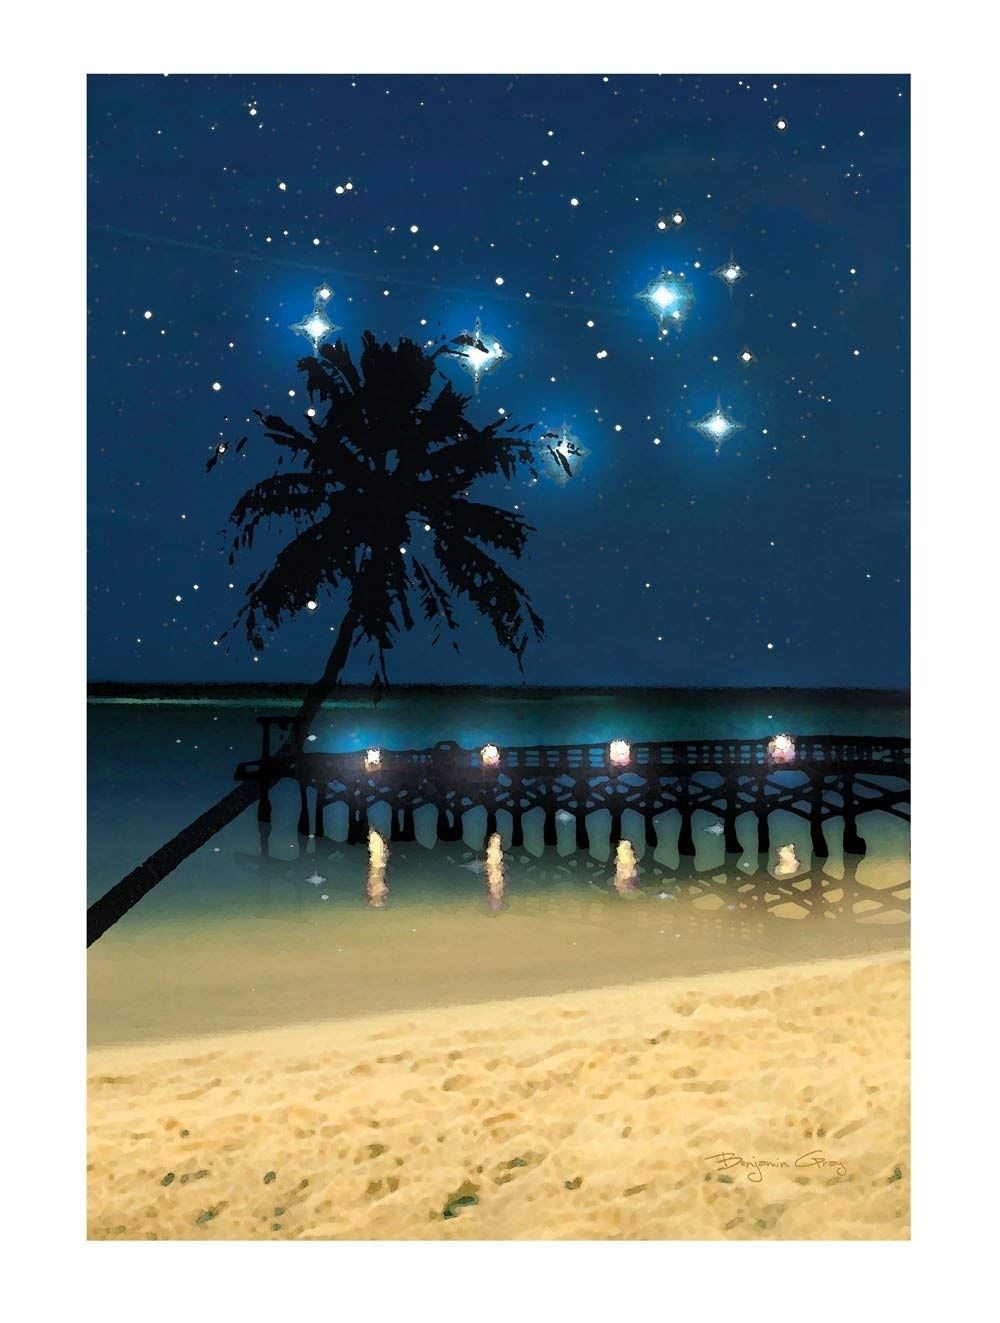 Amazon: Ohio Wholesale Radiance Lighted Canvas Wall Art, Starry With Regard To Lighted Wall Art (View 16 of 20)